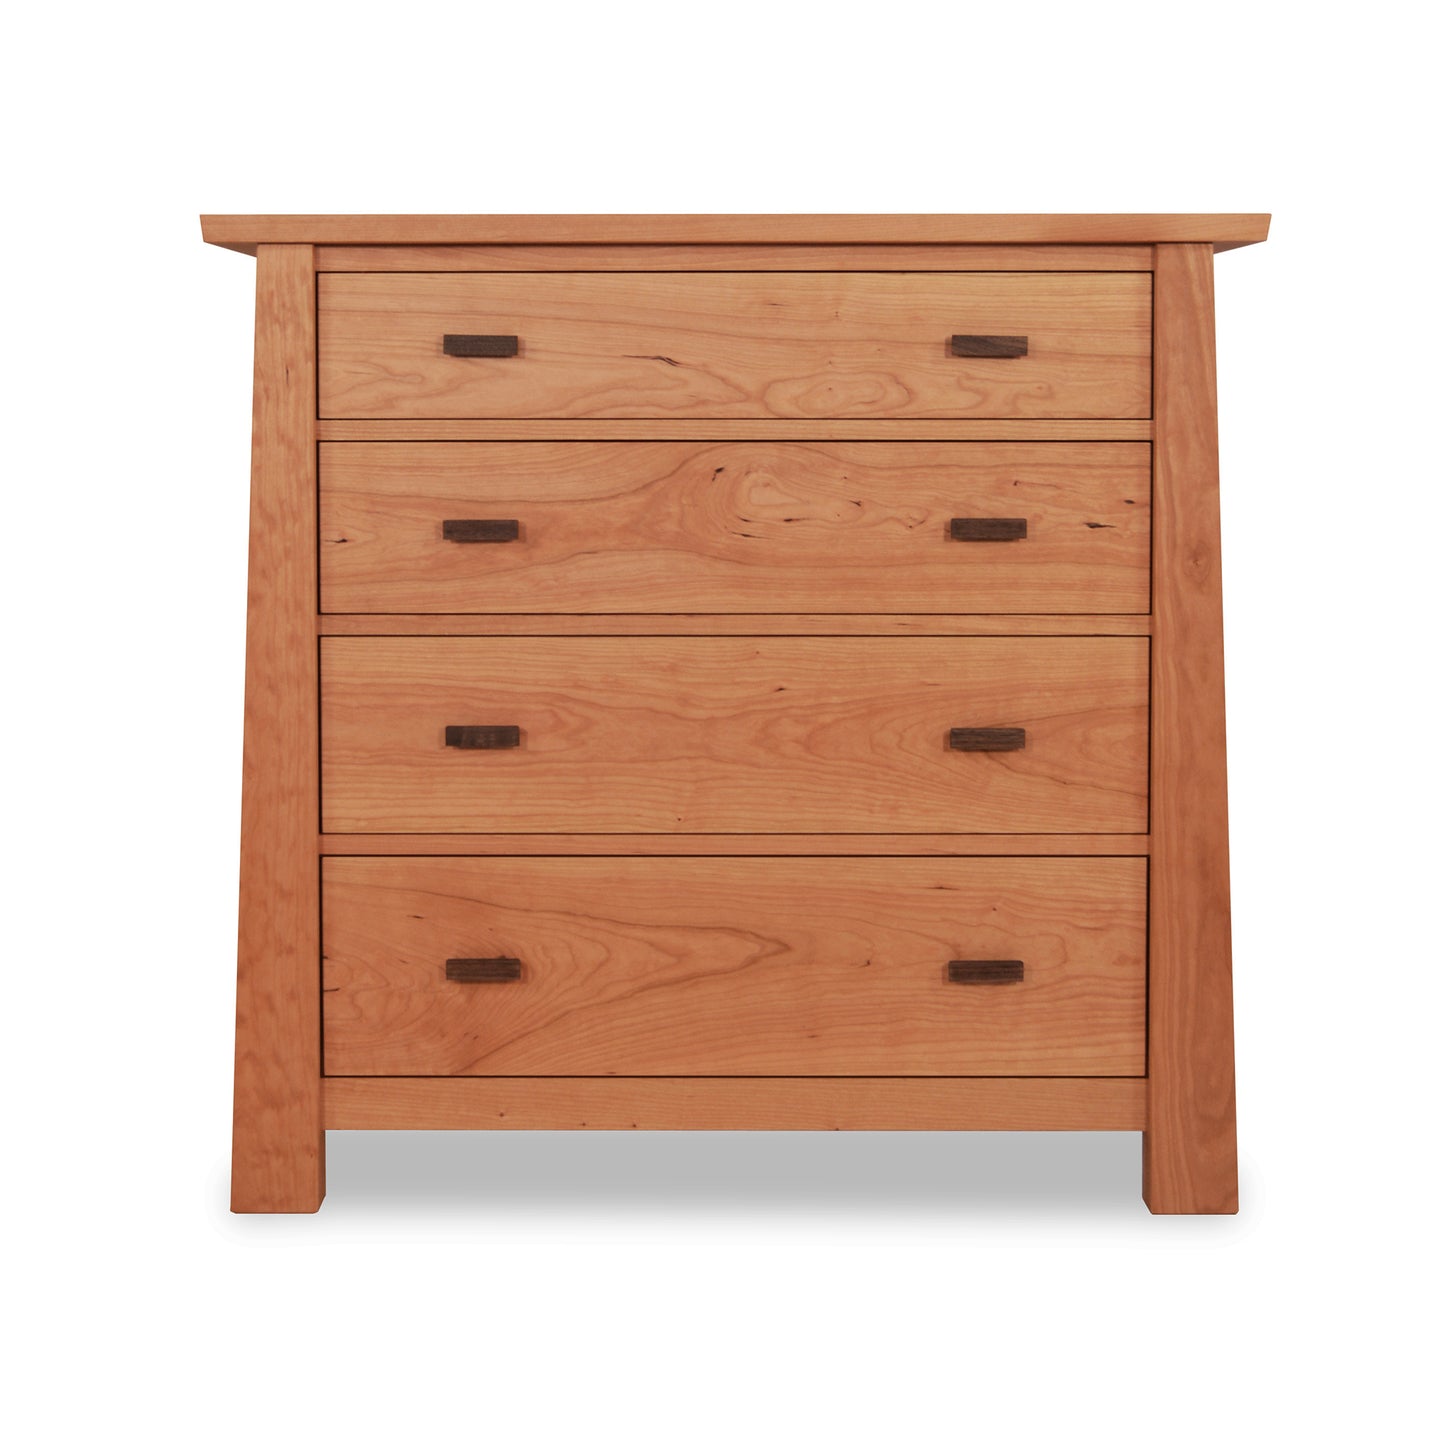 A Gamble 4-Drawer Chest made of light brown cherry wood from Maple Corner Woodworks, featuring four drawers with rectangular black metal handles, isolated on a white background.